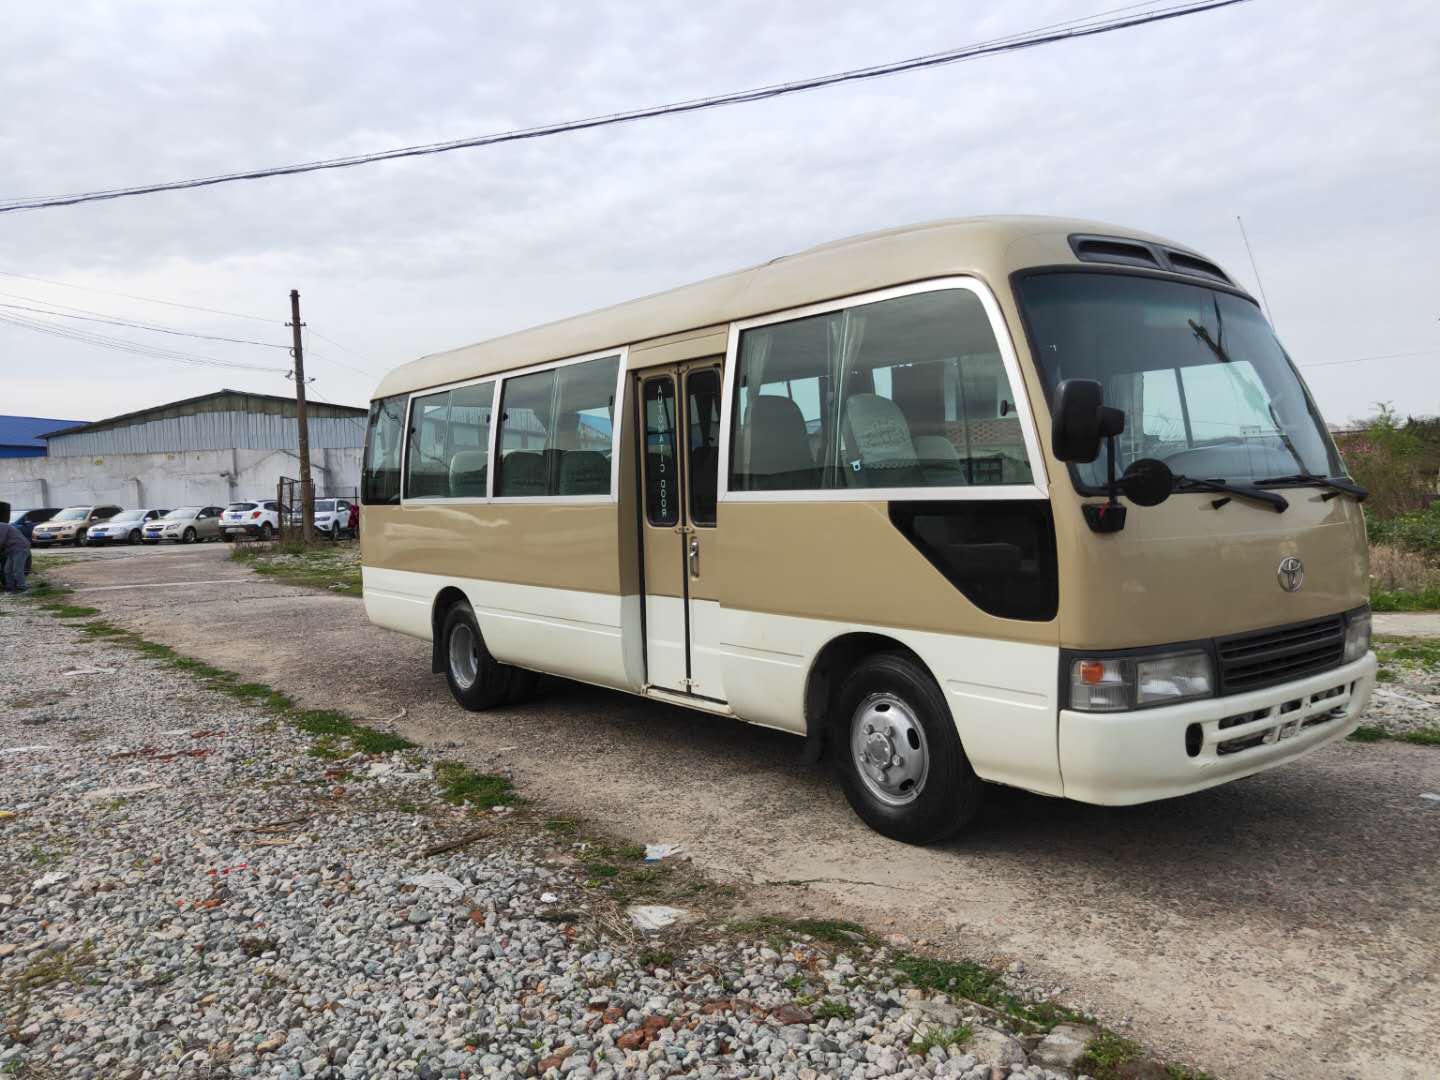 Quality LHD Toyot Coaster 30 Seater 4.2 LT Diesel Manual - High Roof / New and Fairly used 30 seater coaster bus for sale